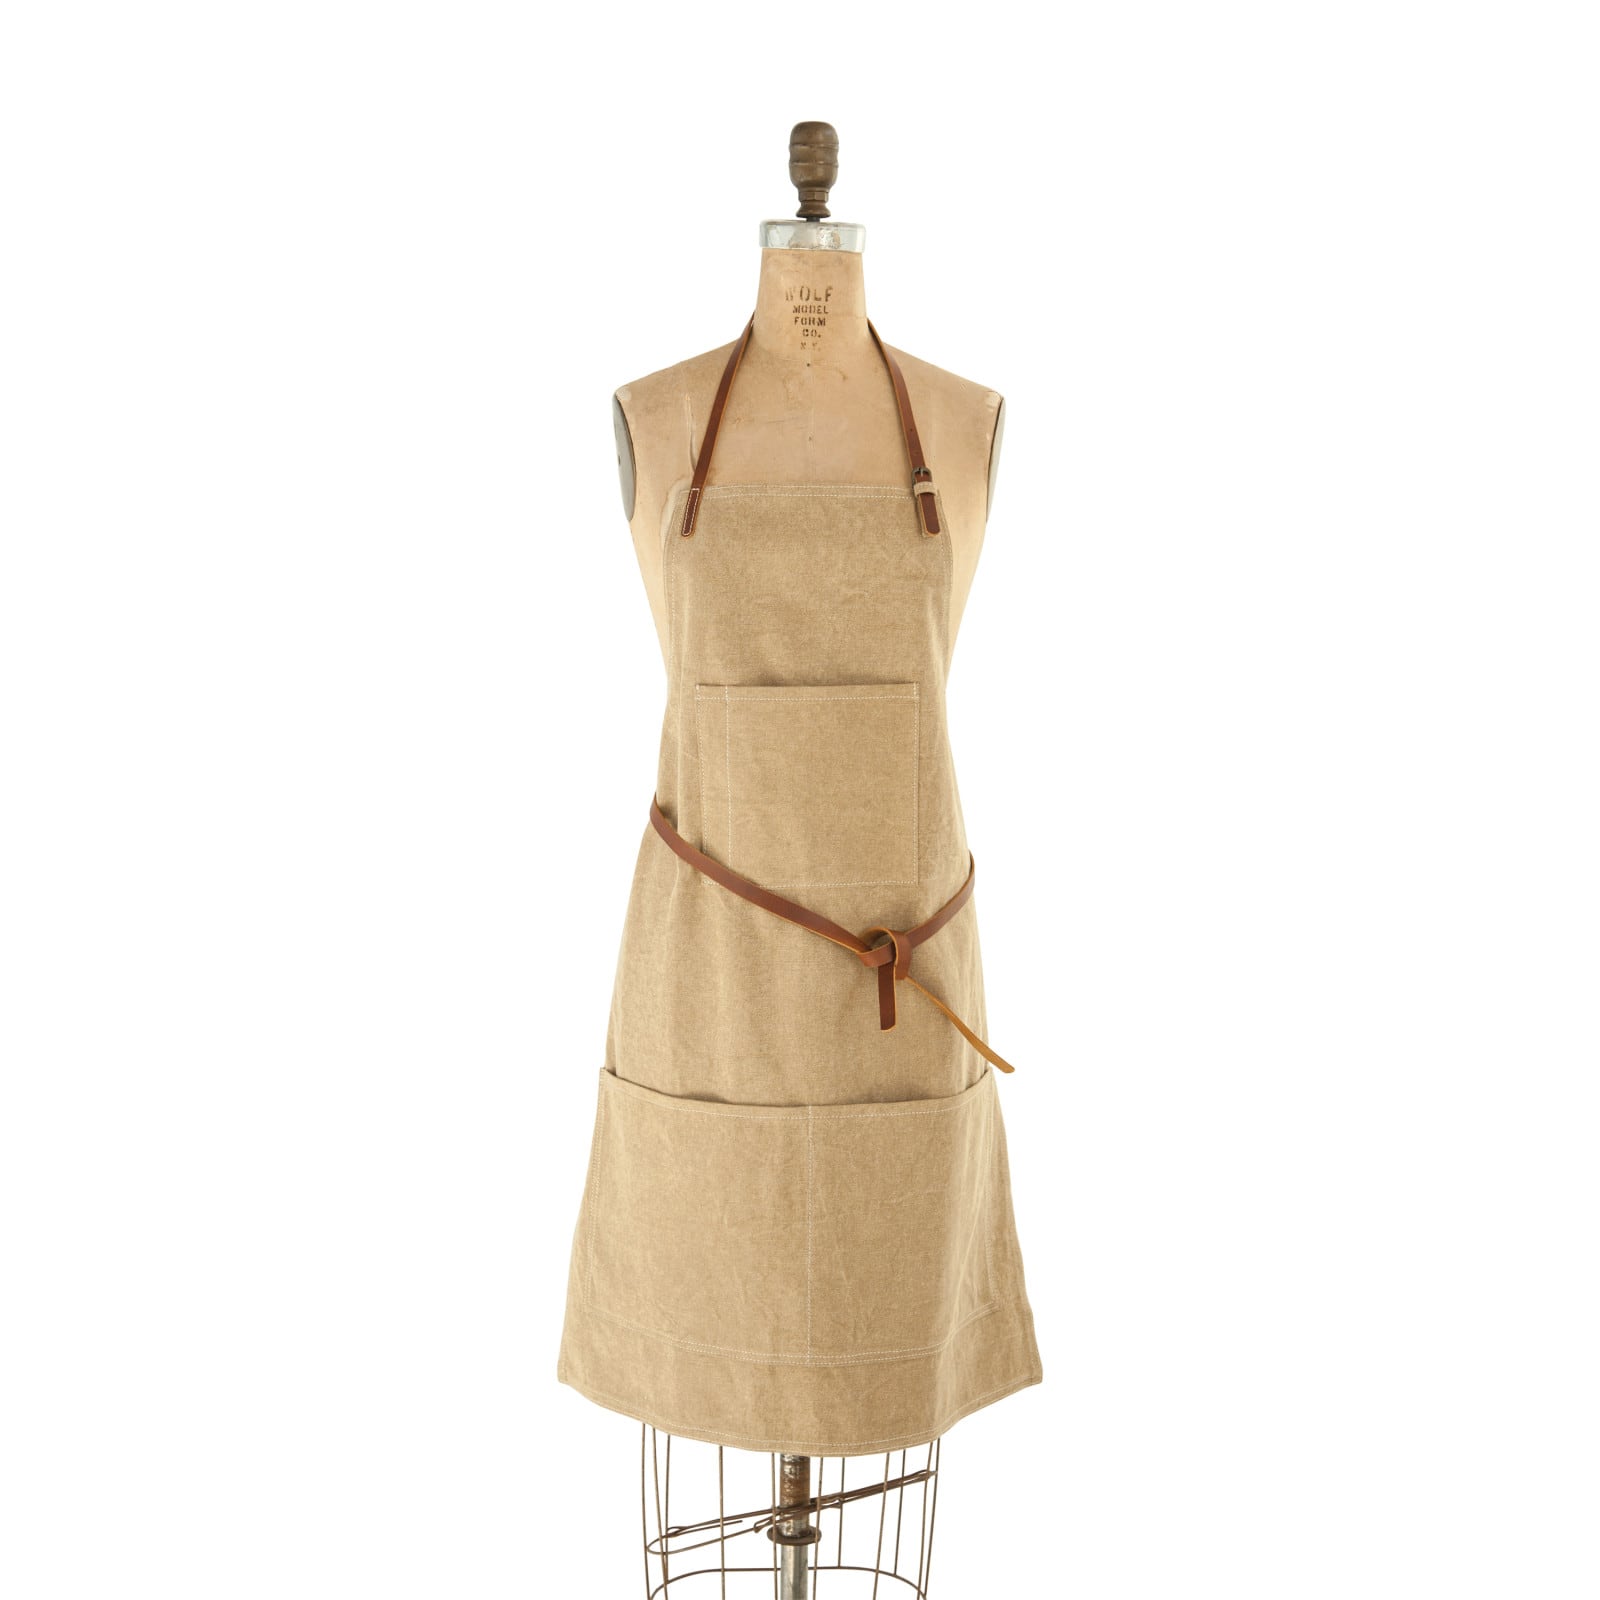 Khaki Apron with Pockets & Leather Ties | Michaels